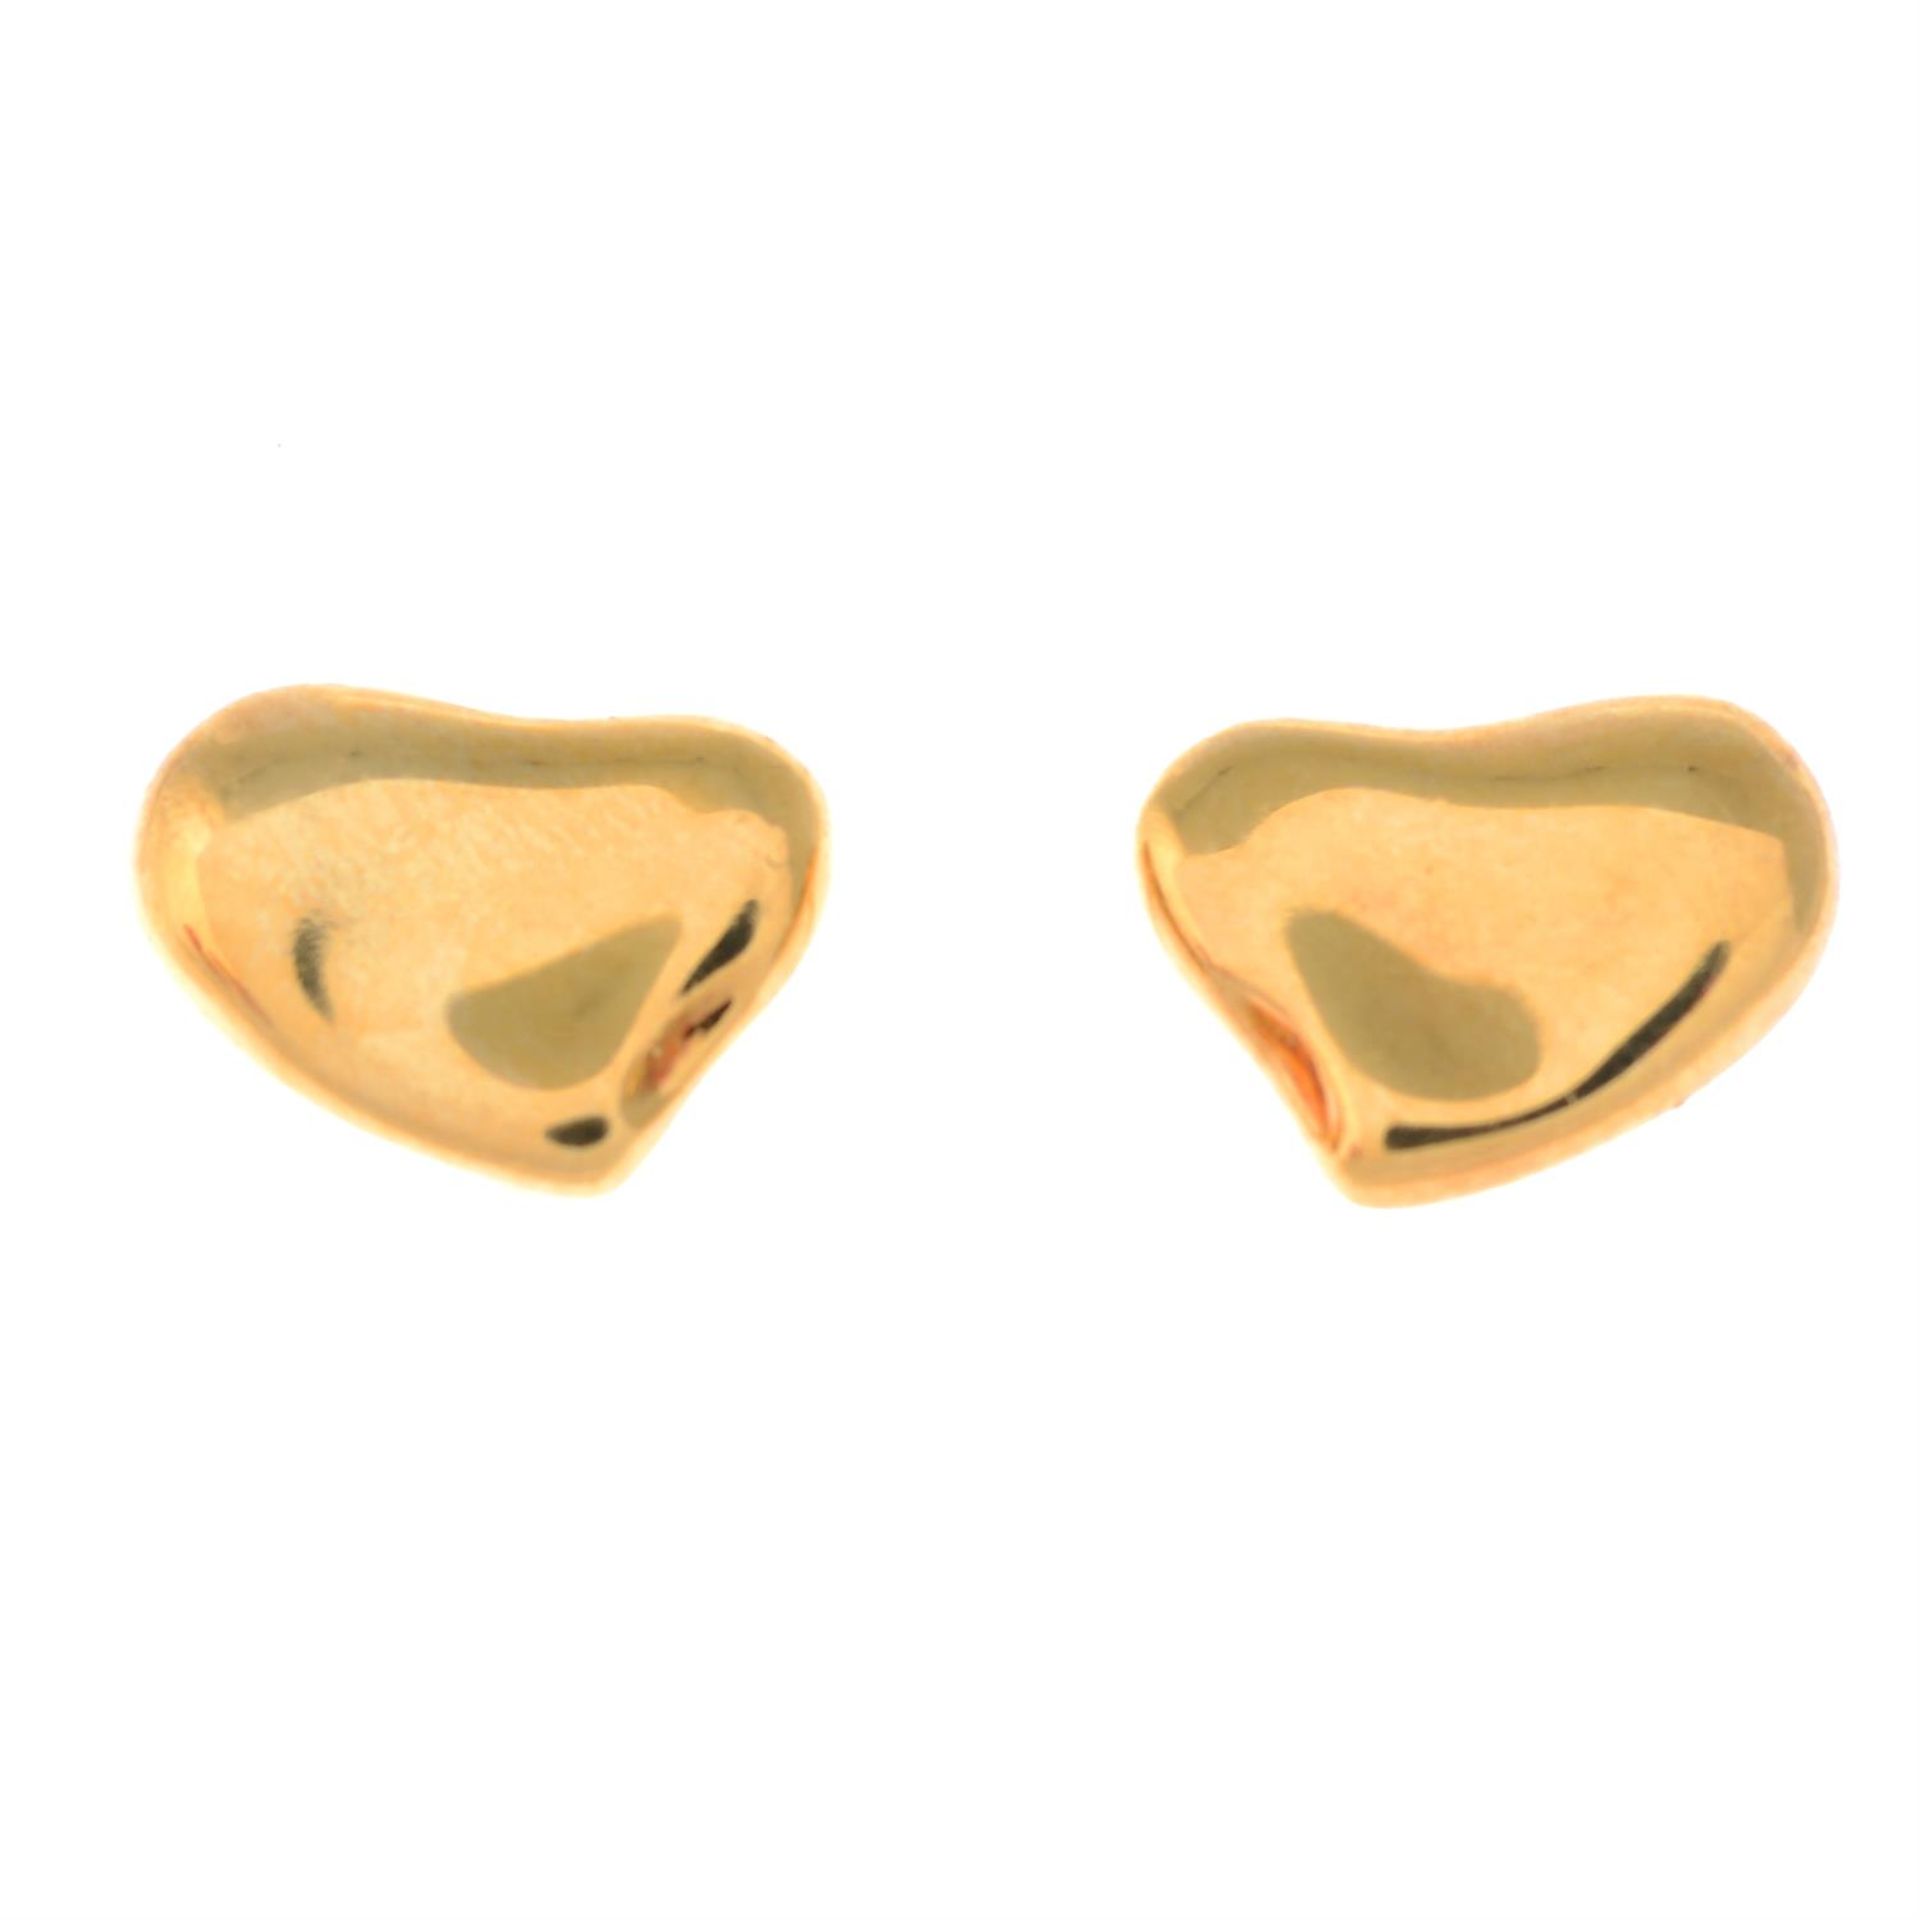 A pair of 'Full Heart' stud earrings, by Elsa Peretti for Tiffany & Co.